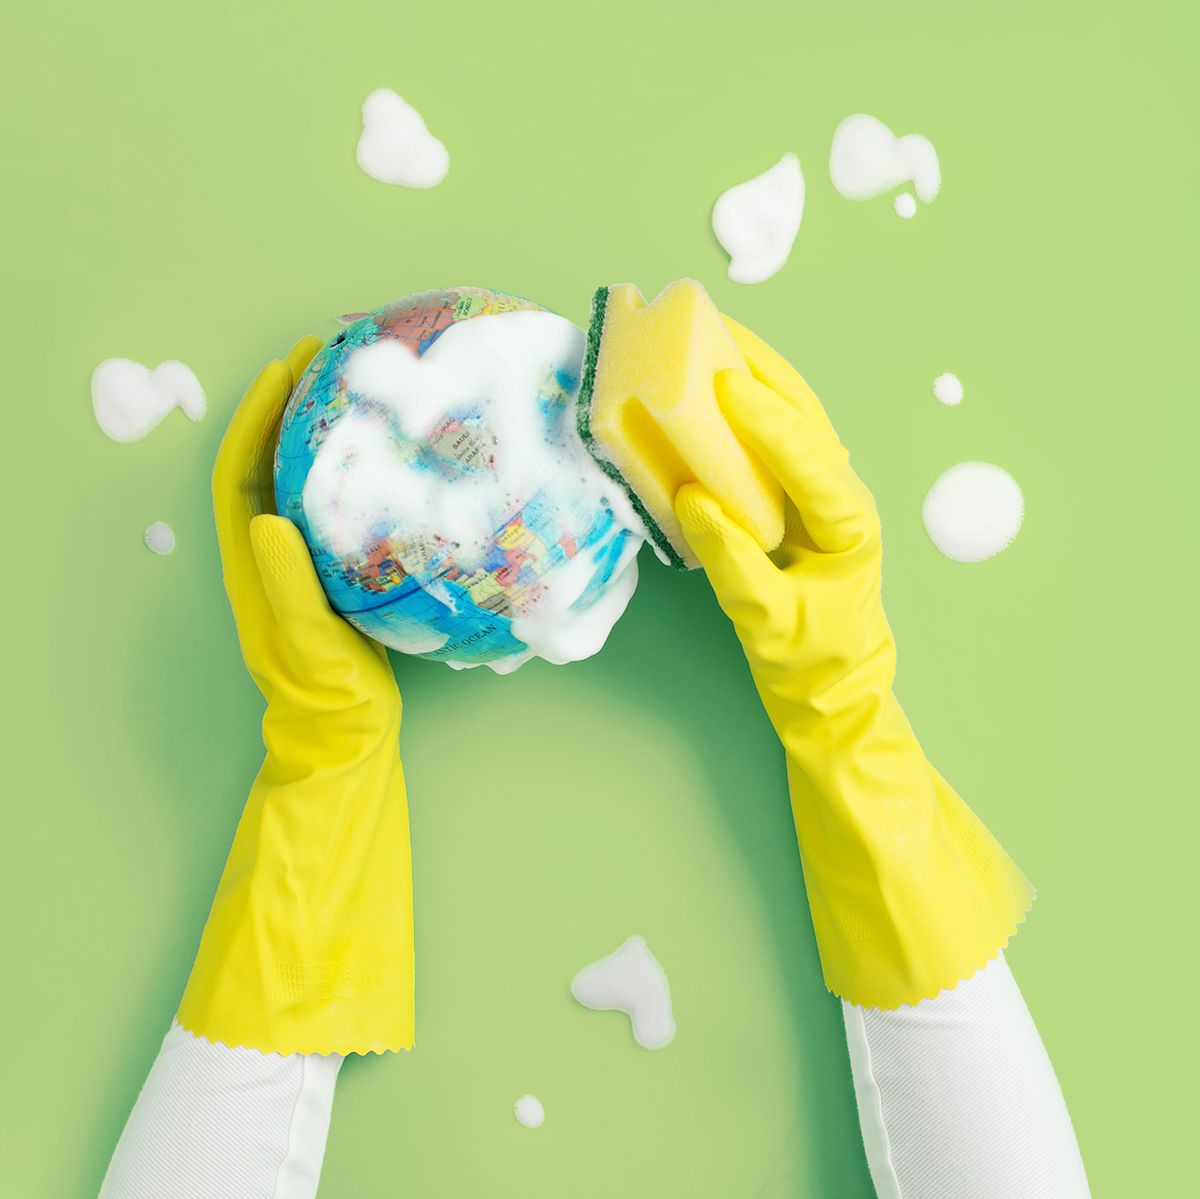 hand with protective rubber glove cleaning a globe model with soap and cleaning sponge on green background